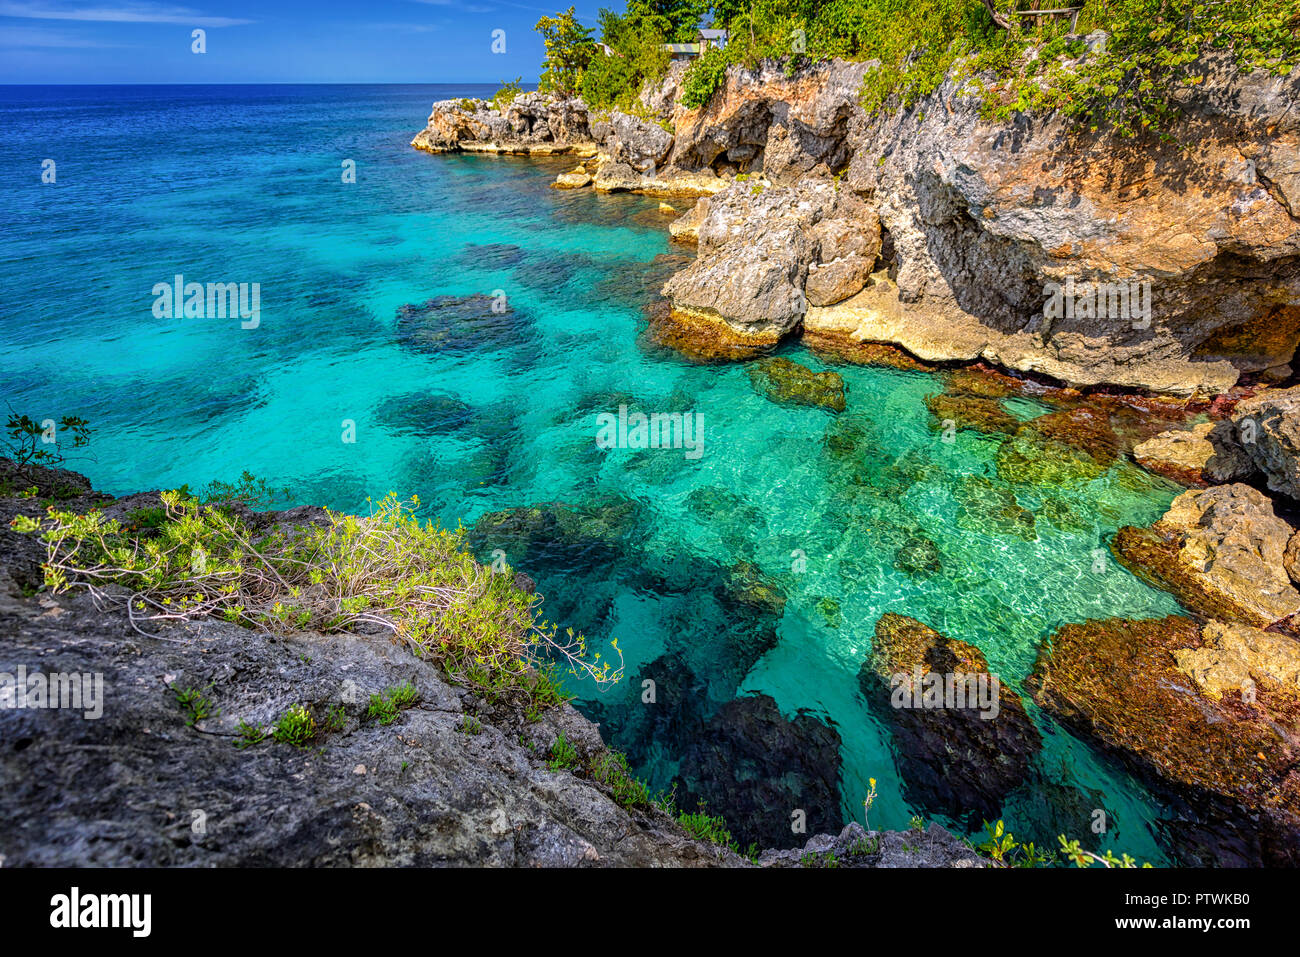 Beautiful clear turquoise water near rocks and cliffs in Negril Jamaica. Caribbean paradise island and water at the seaside with a blue sky Stock Photo